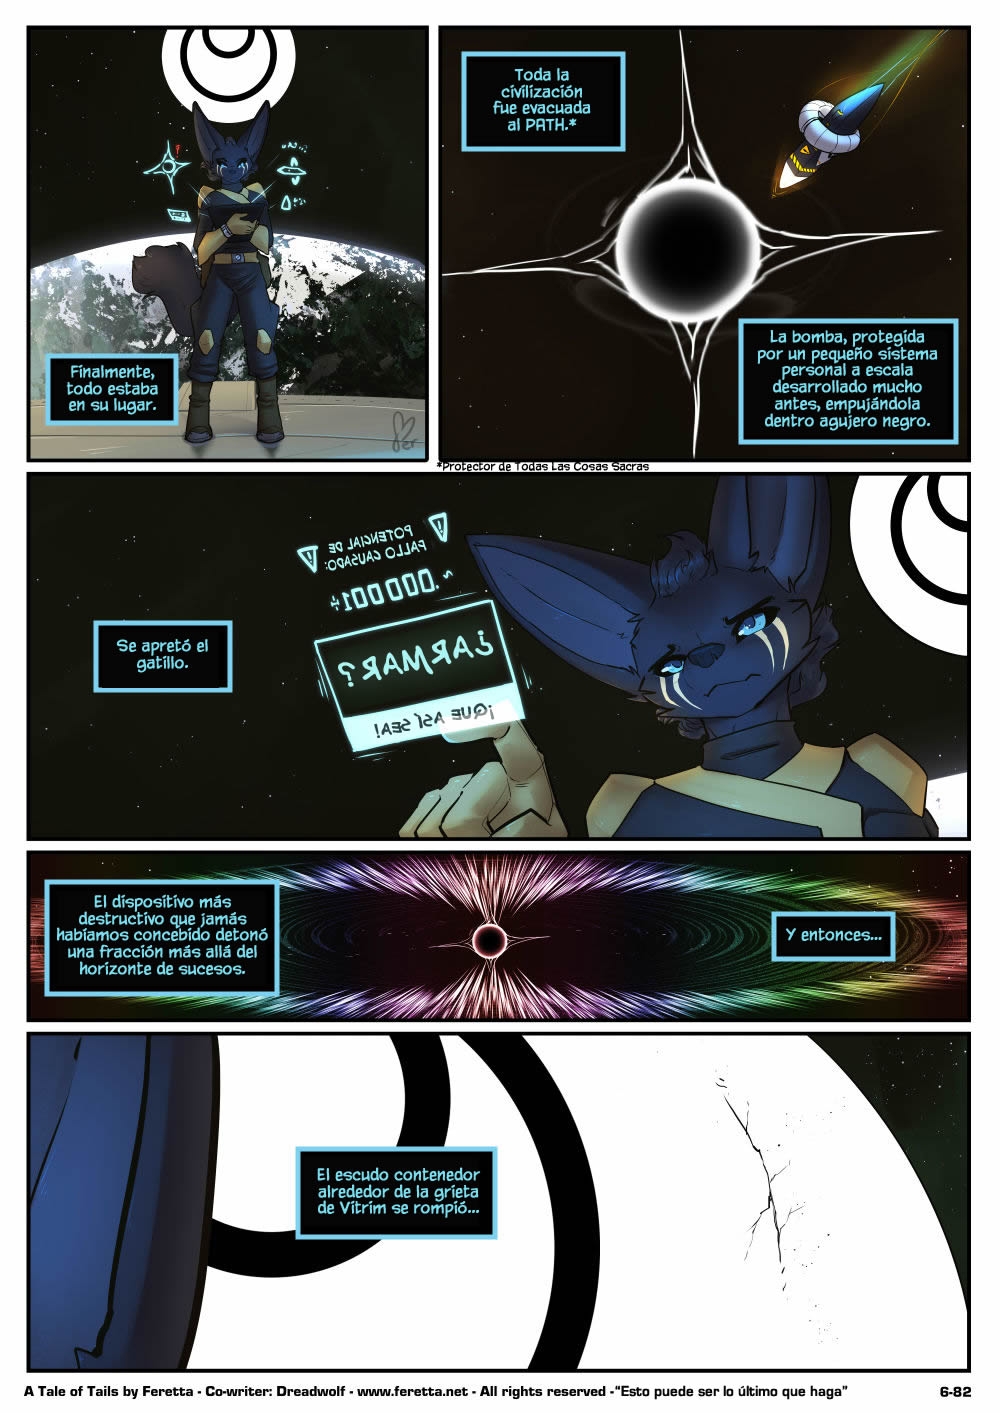 [Feretta] A Tale of Tails: Chapter 6 - Paths converge / Los caminos convergen [Spanish] [Red Fox Makkan] 82